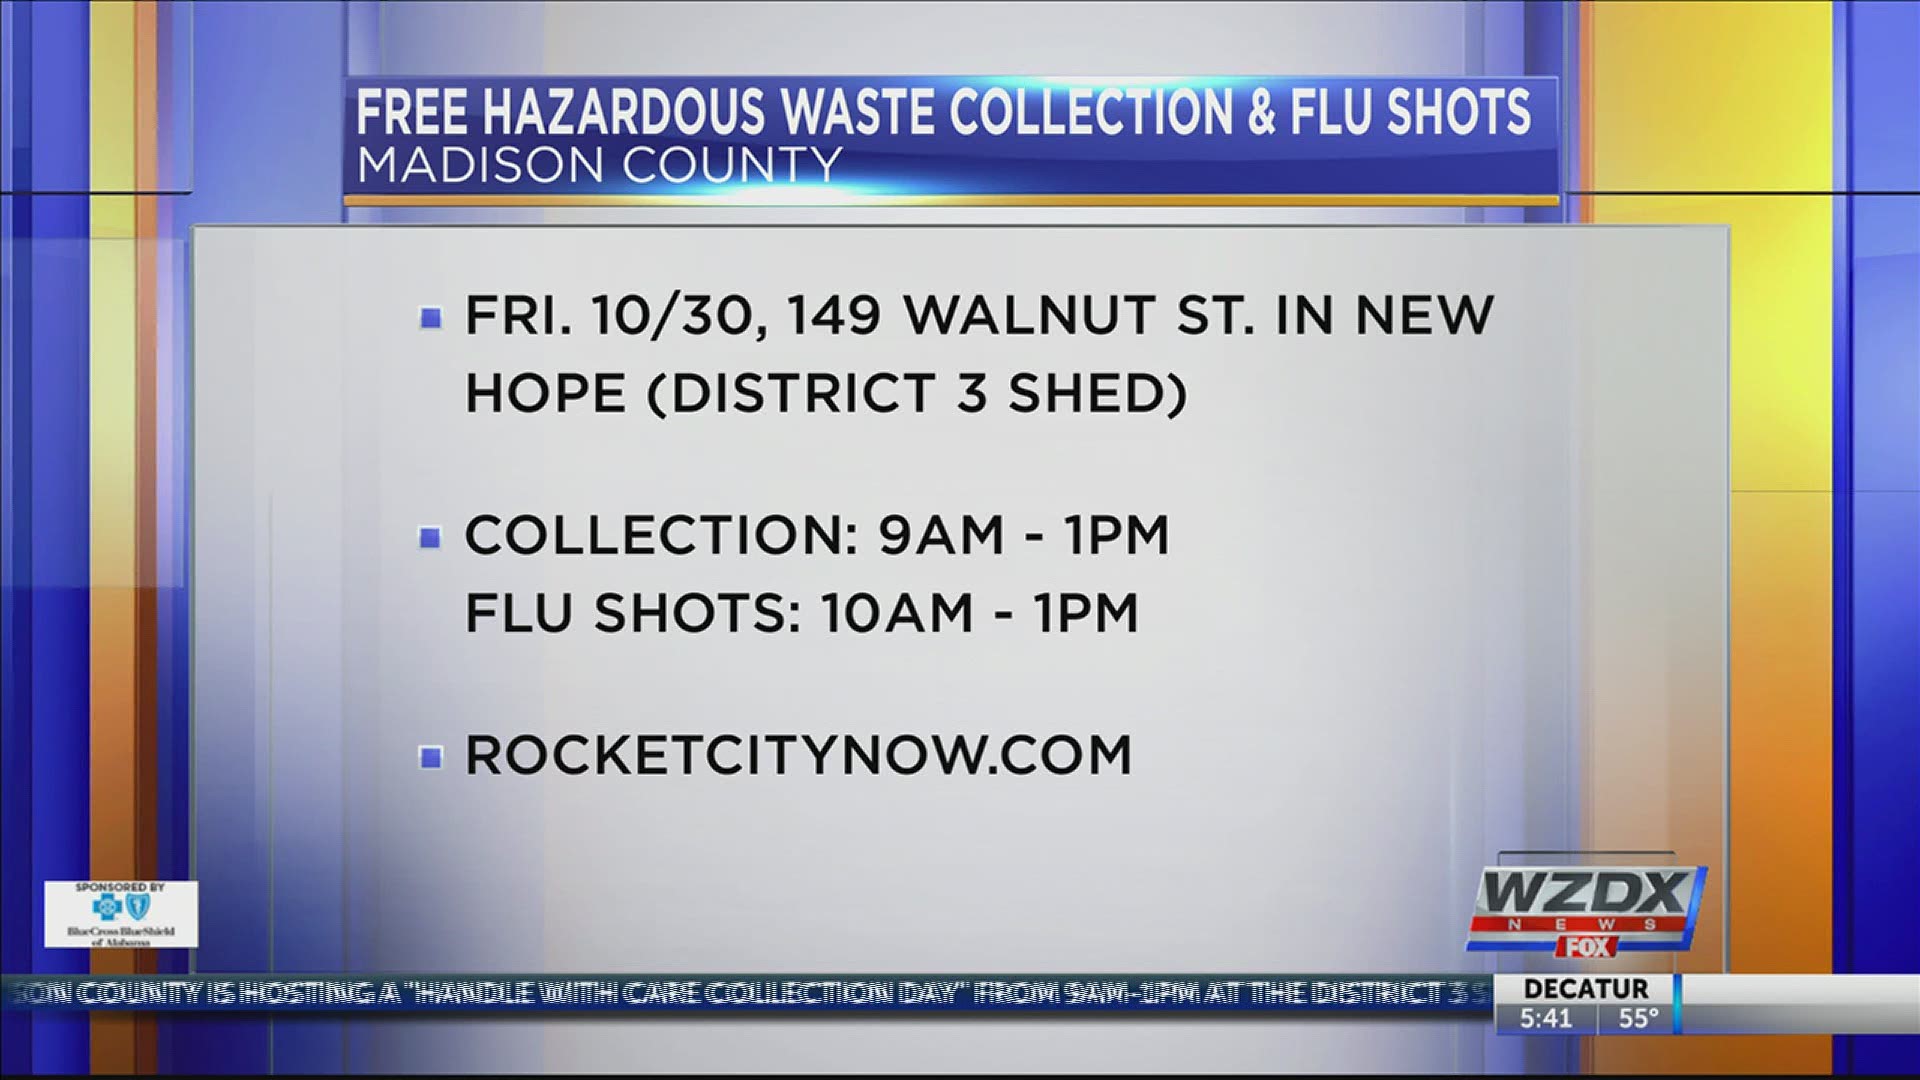 Need to drop off some hazardous waste? You can also take the chance to get a free flu shot and order lunch.